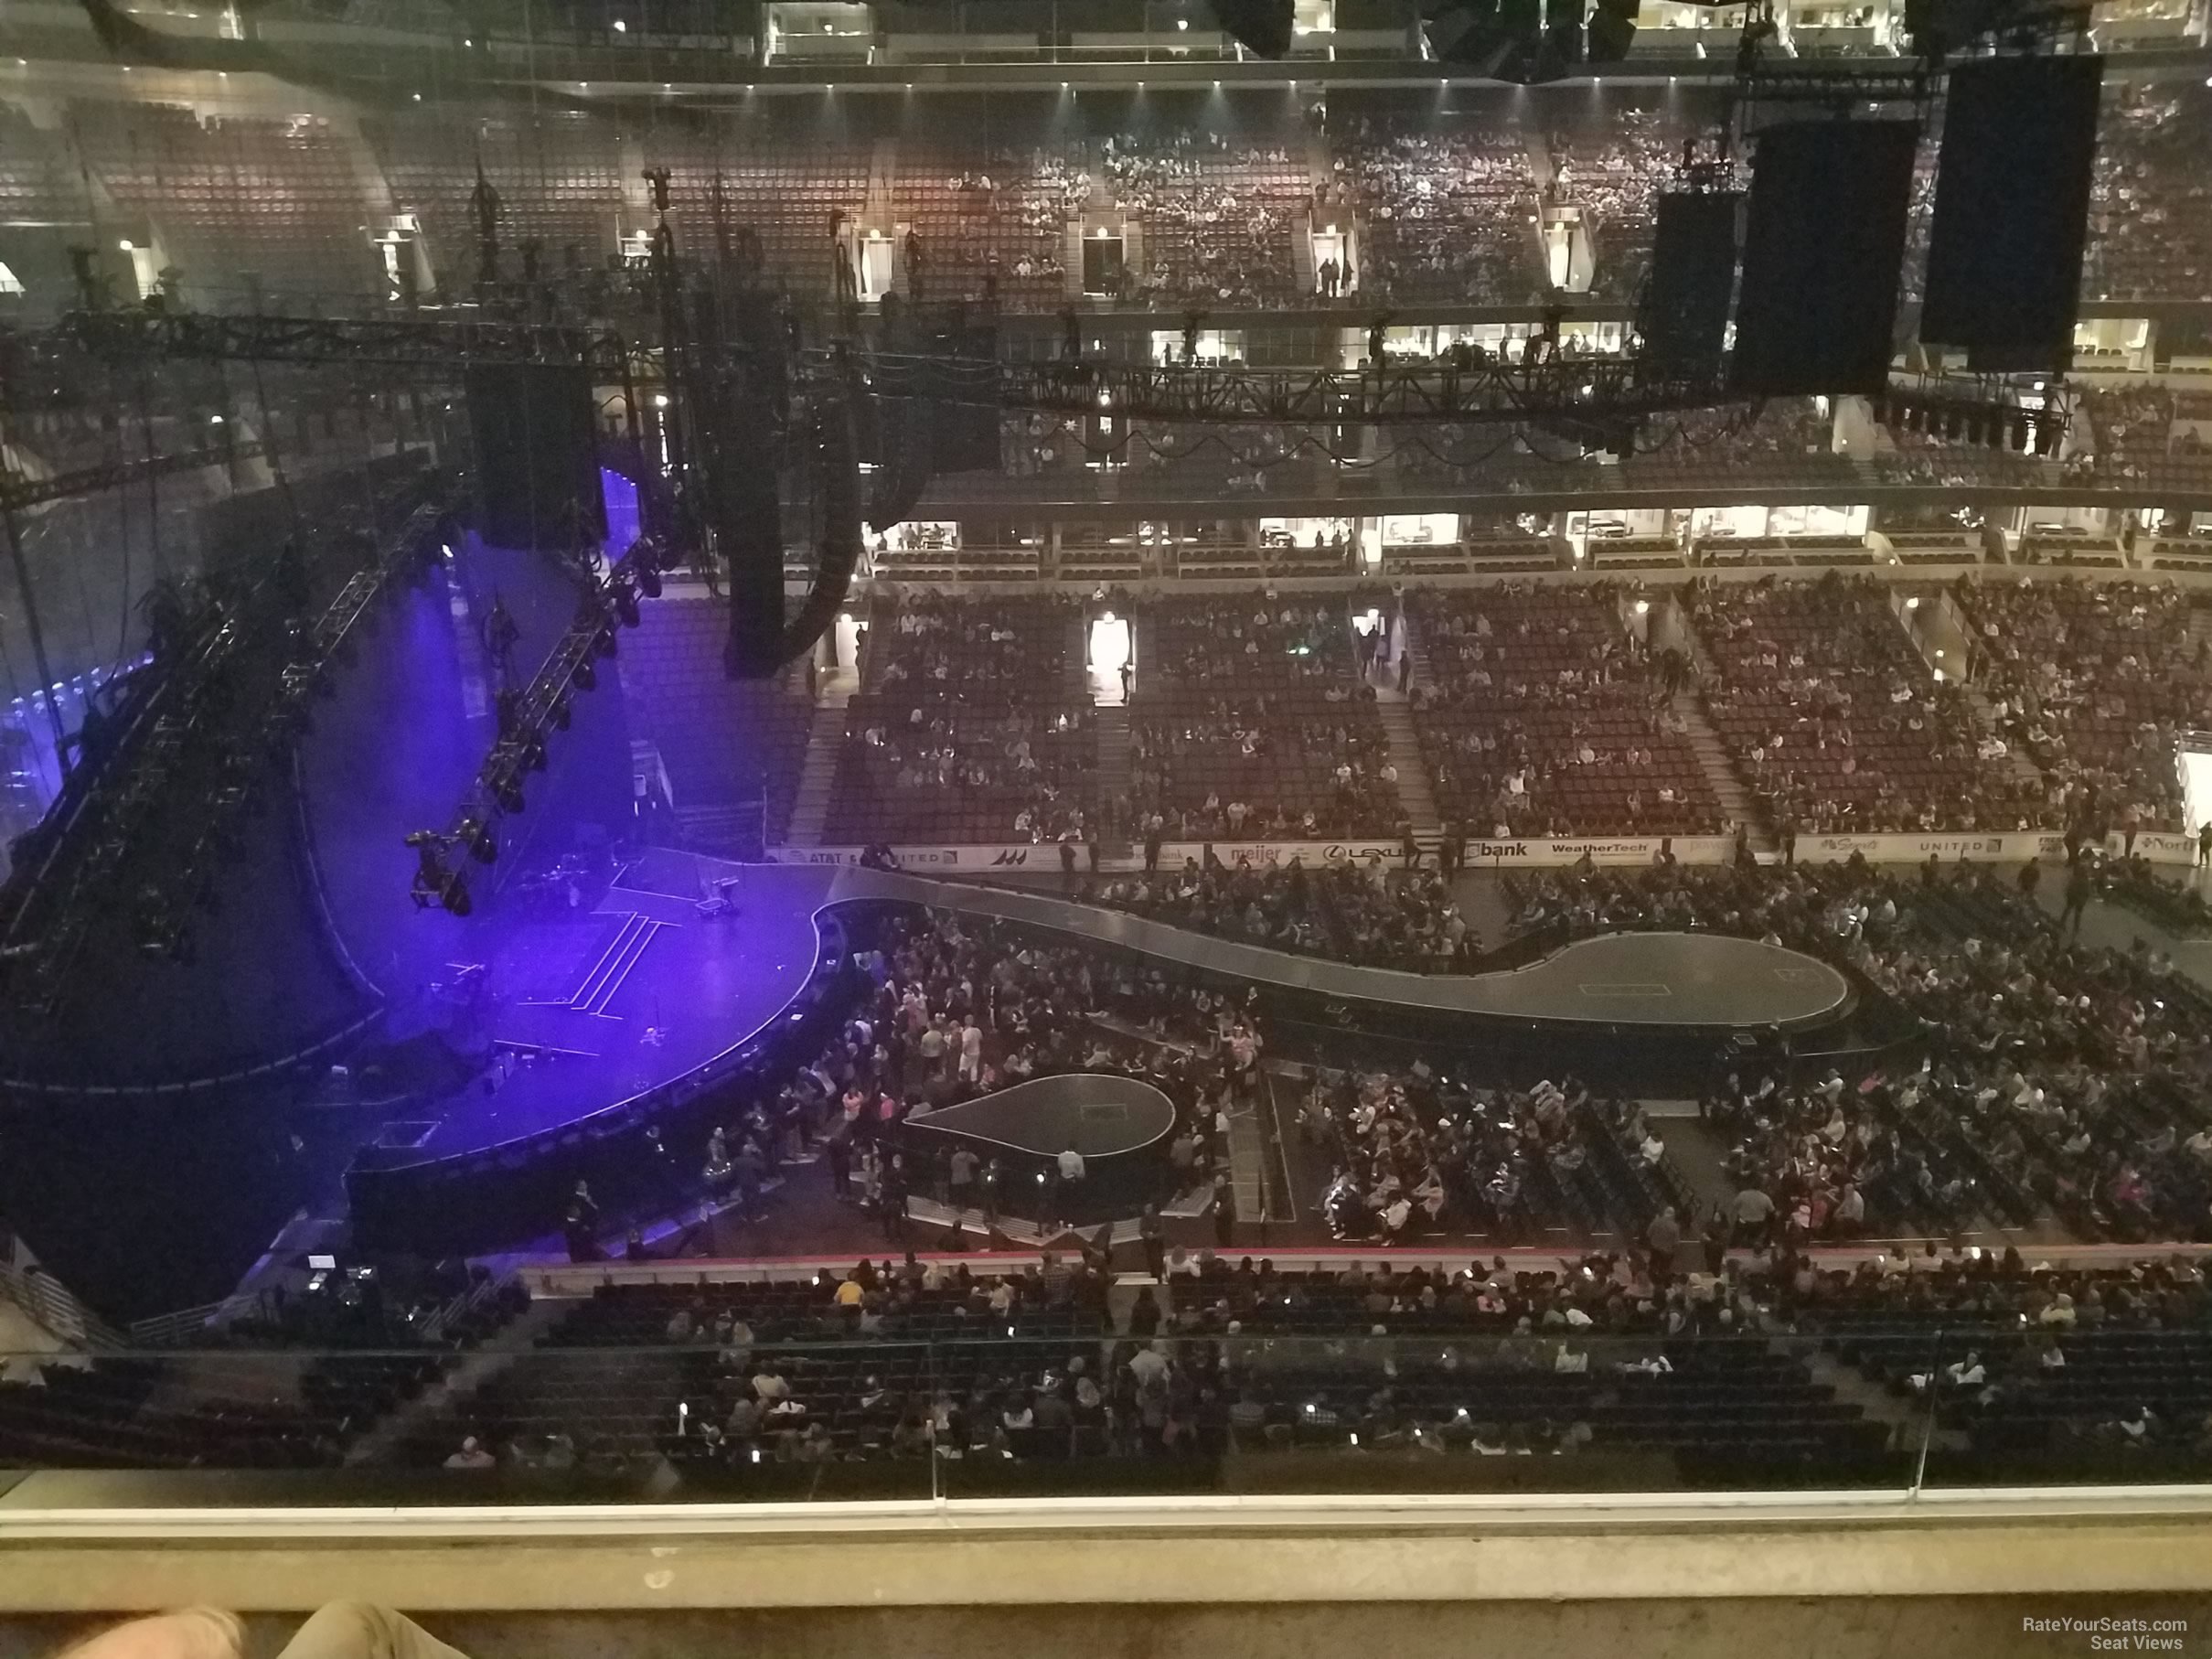 section 319, row 4 seat view  for concert - united center